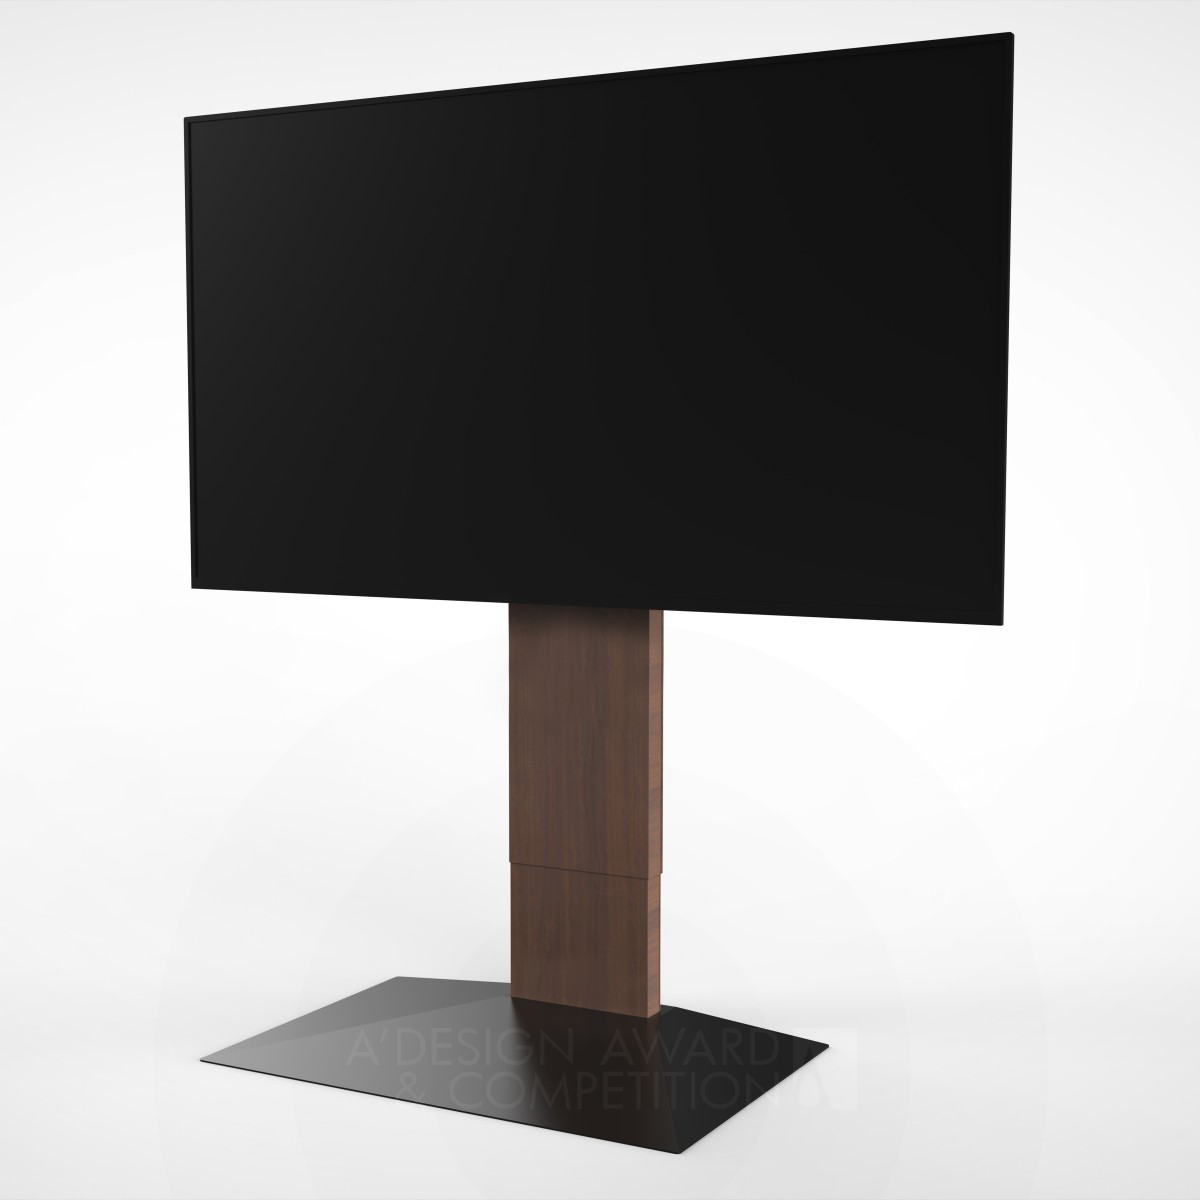 Wall V4 TV Stand by Nakamura Co.